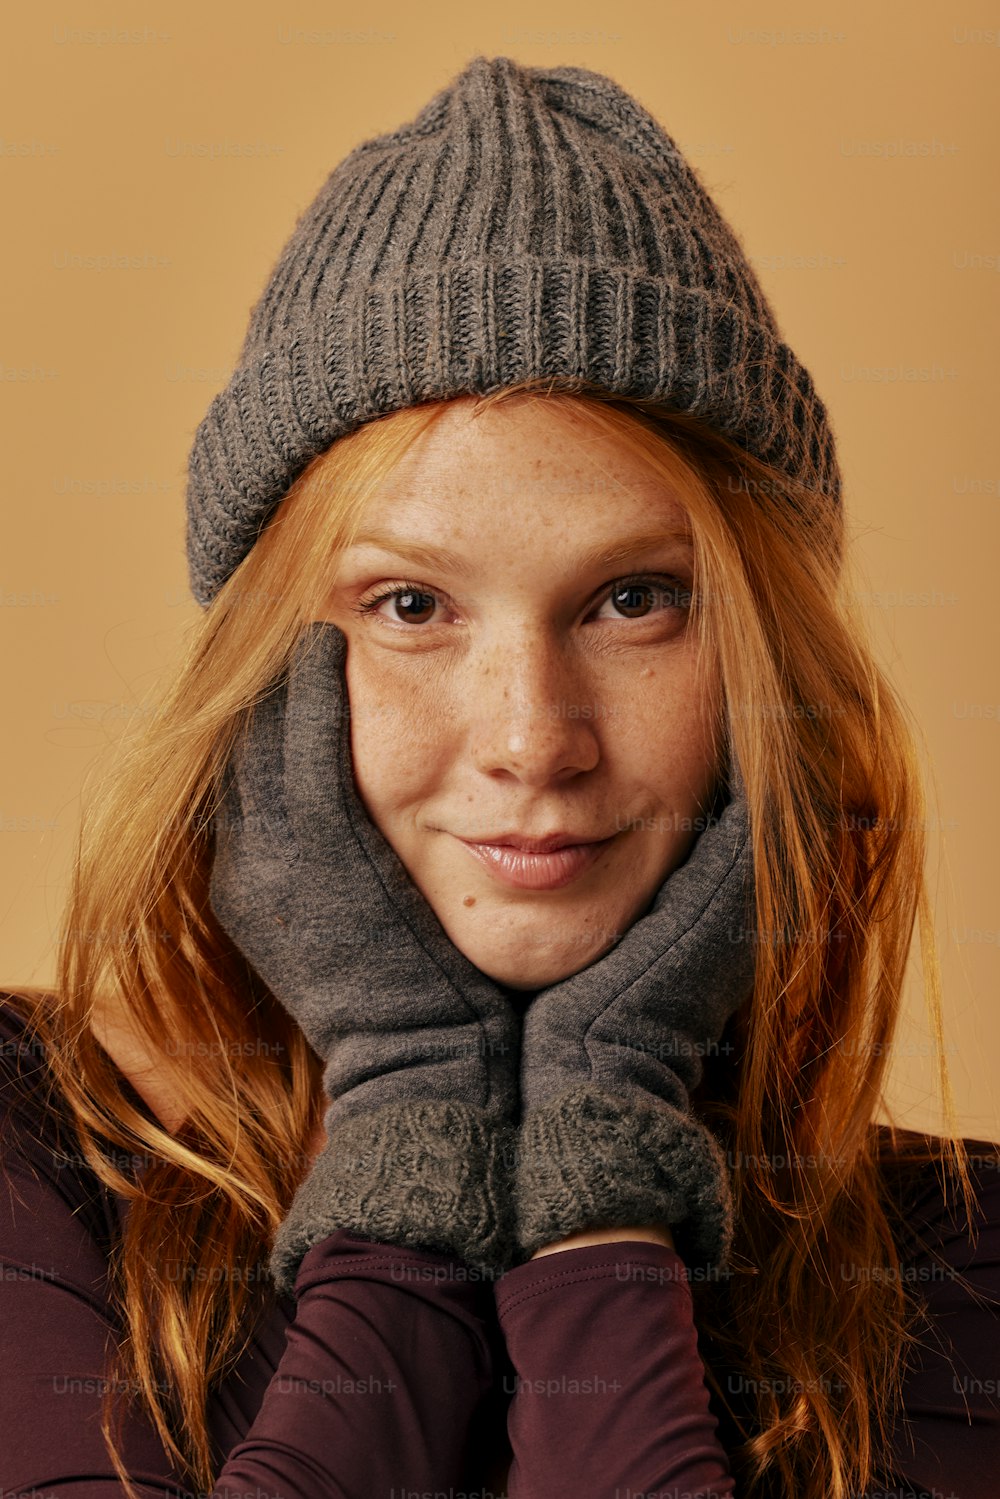 a woman with red hair wearing a gray hat and gloves